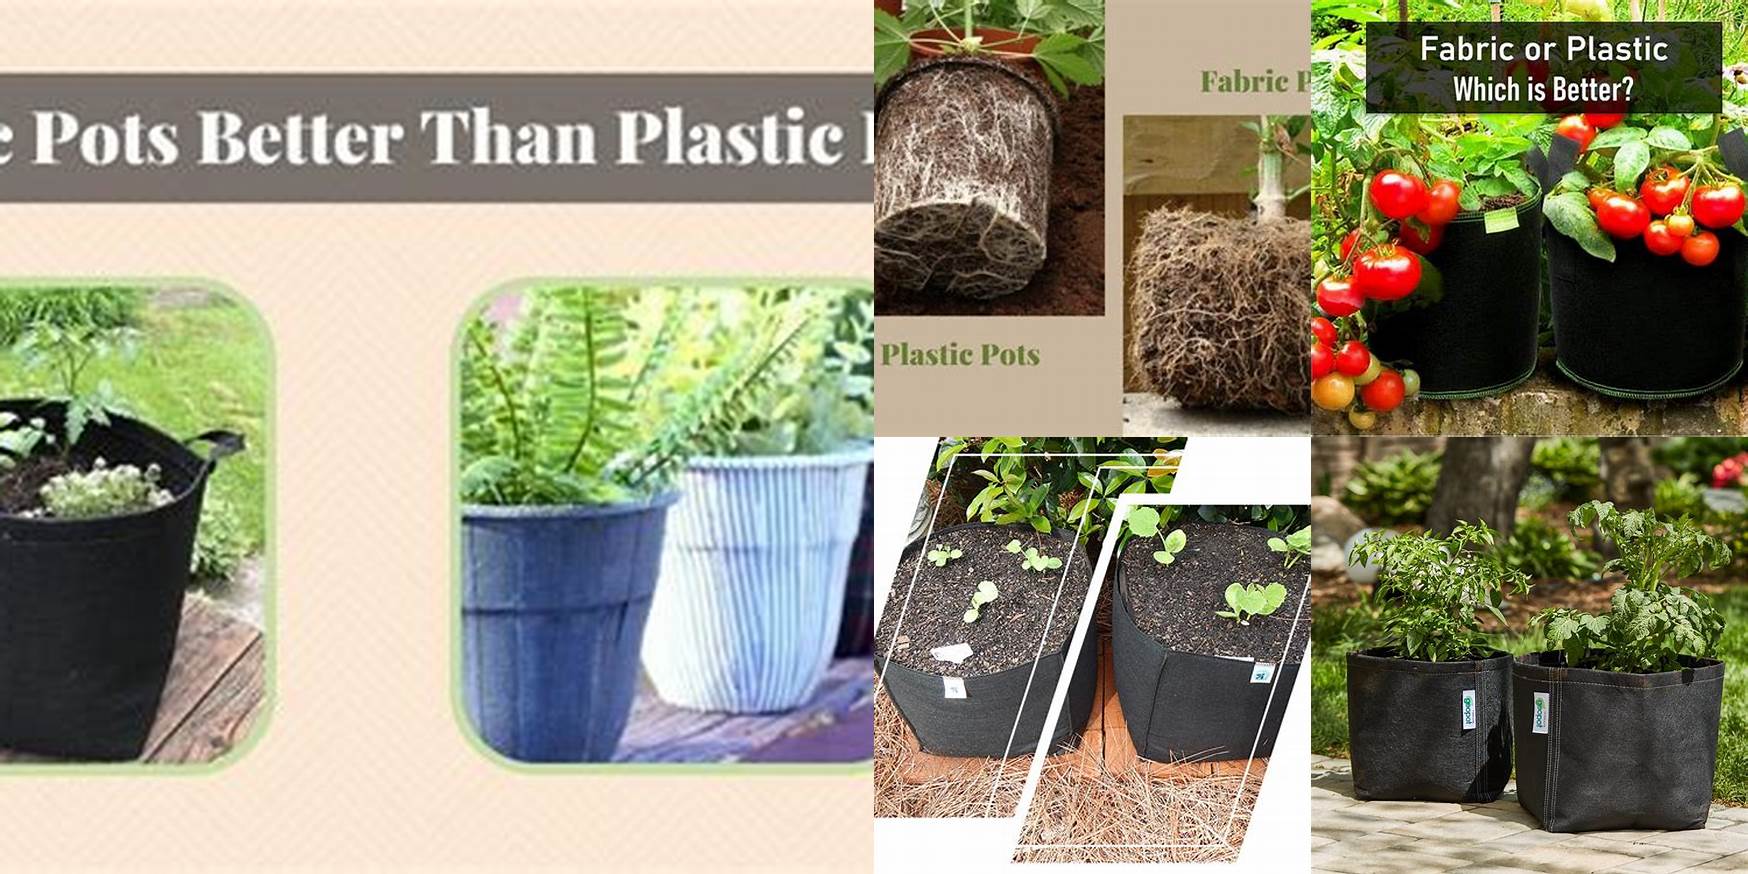 Are Fabric Pots Better Than Plastic